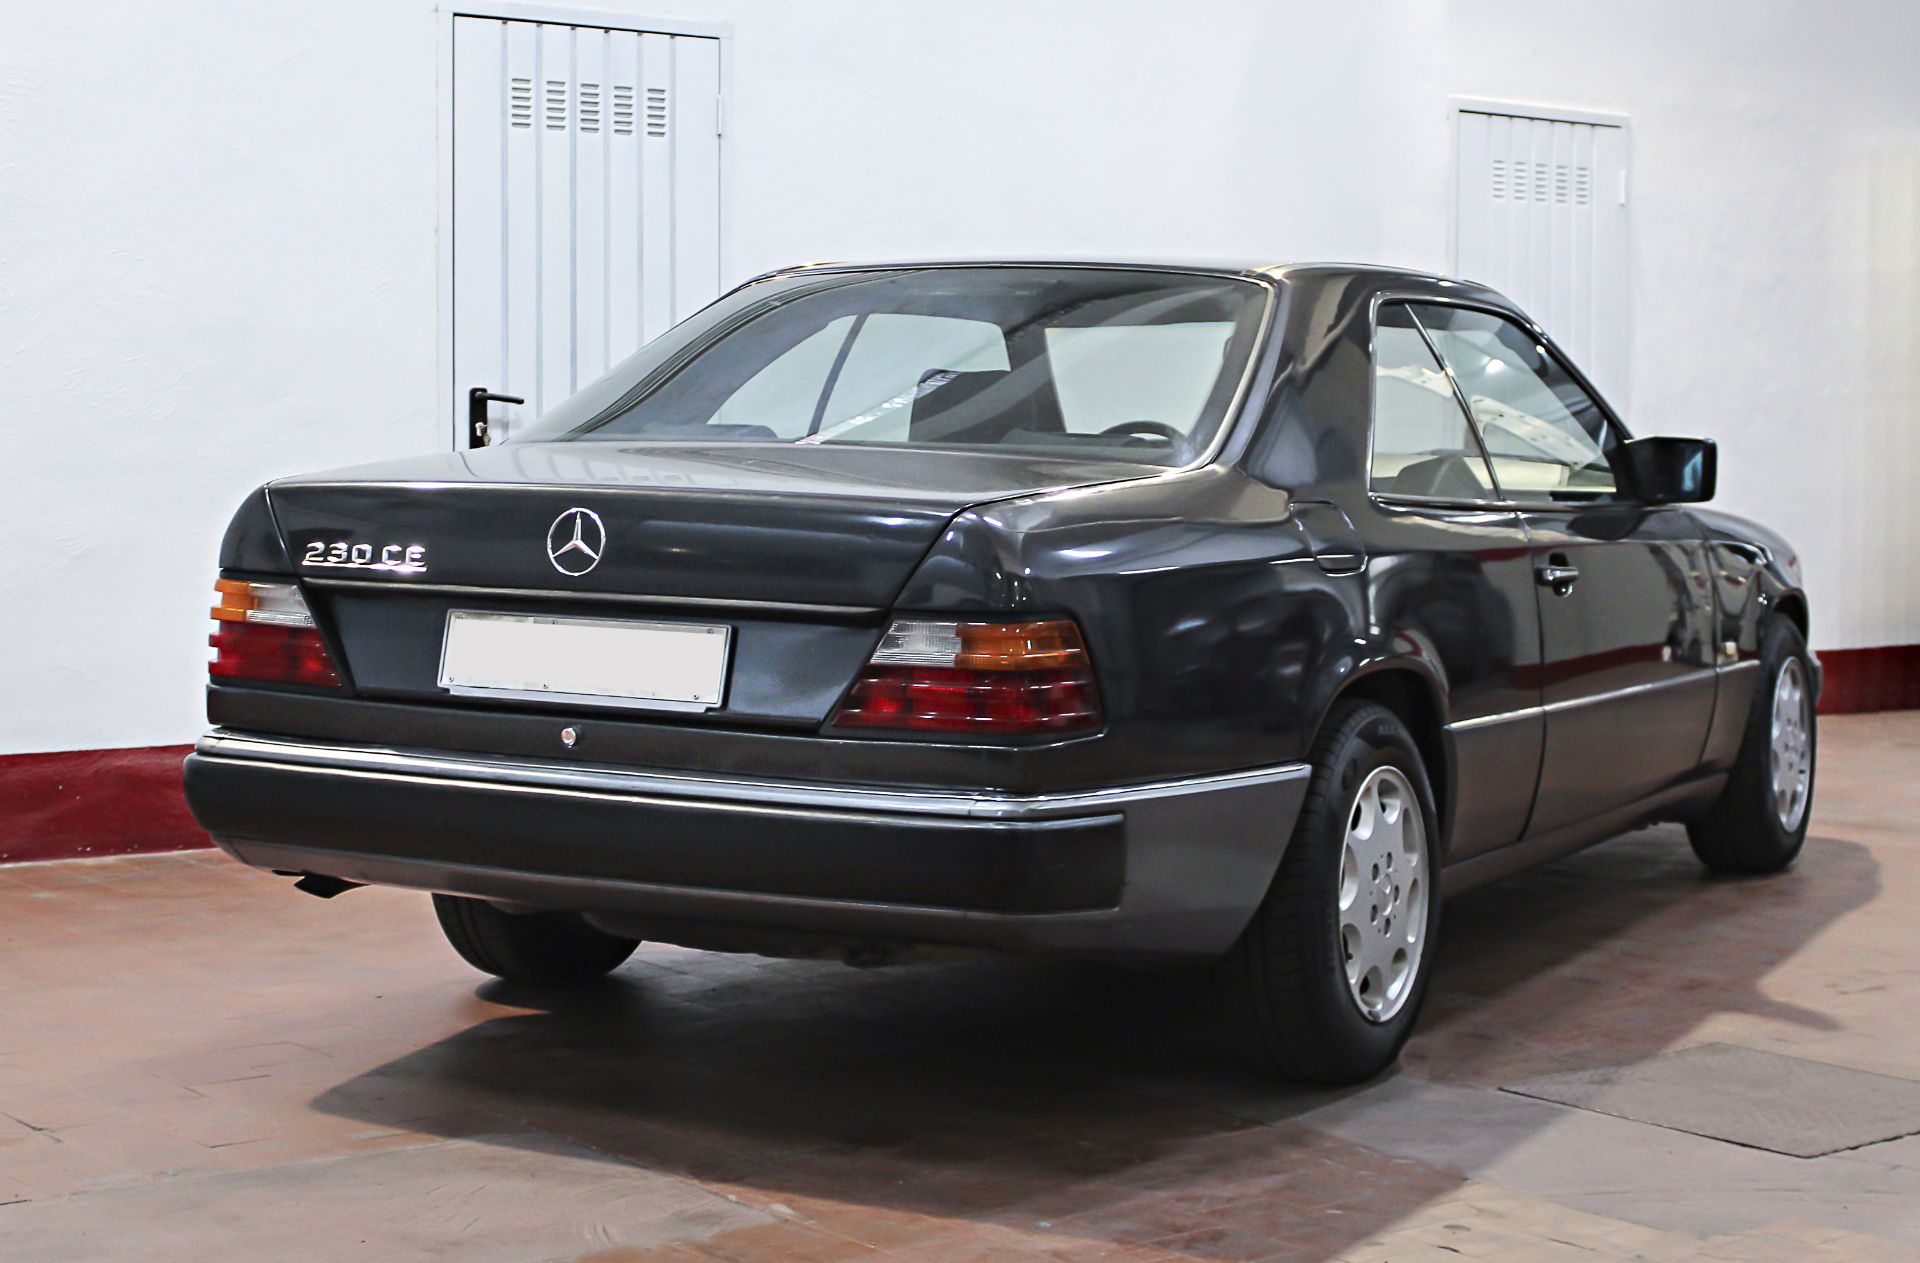 MERCEDES 230 CE 1992 - Image 2 of 3